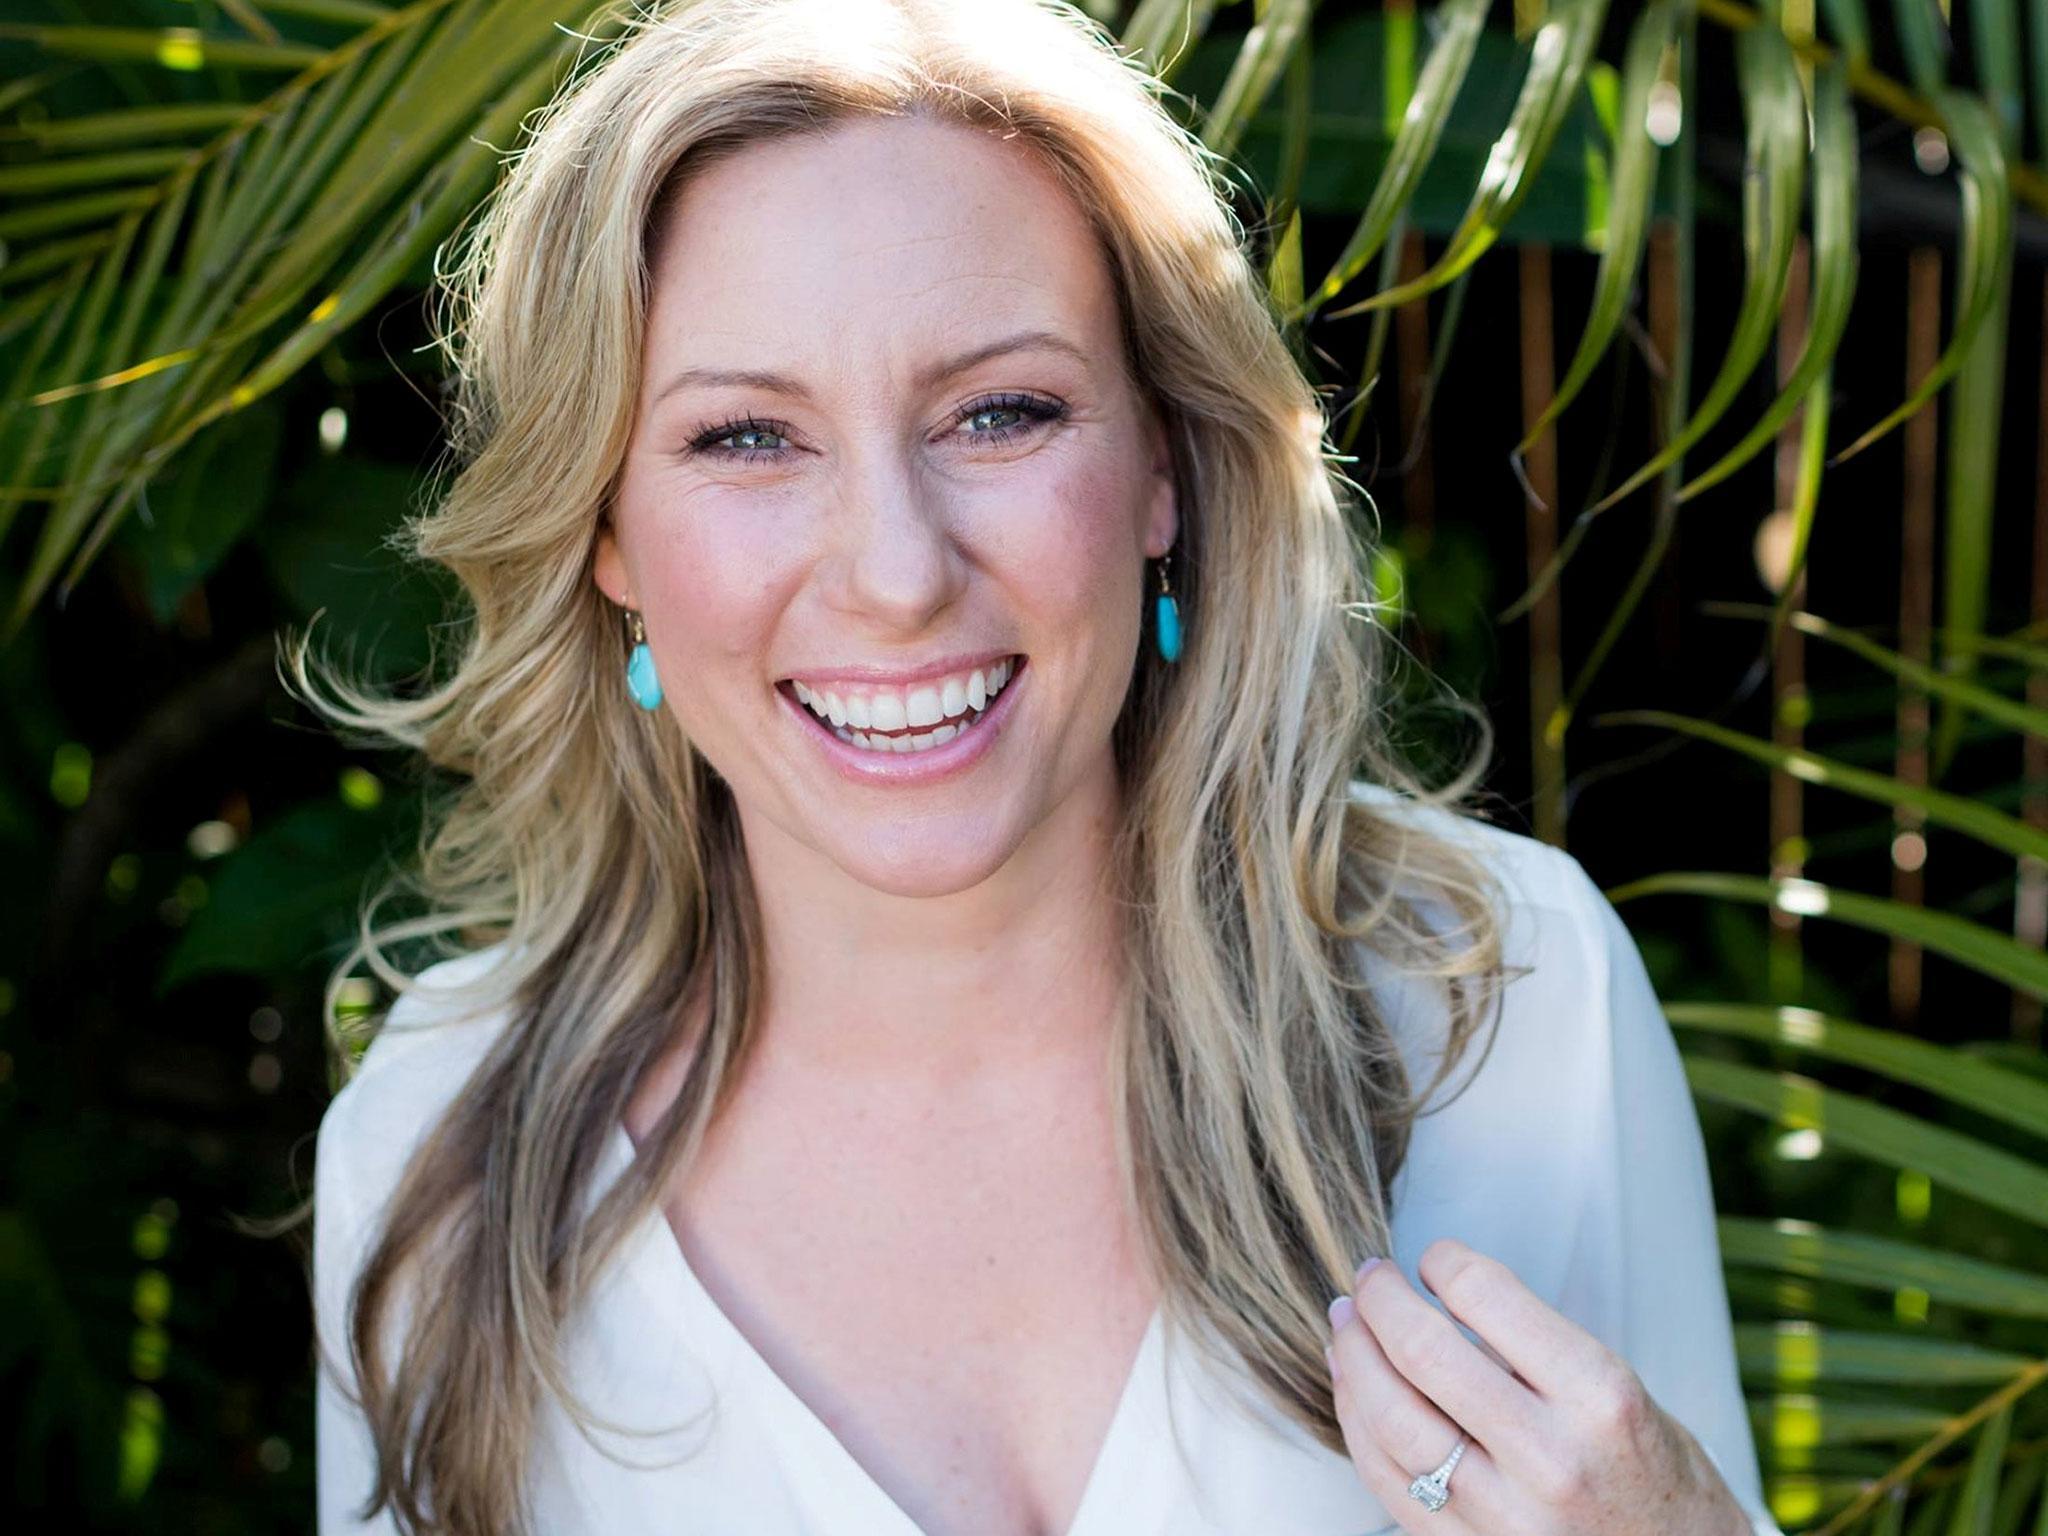 Justine Damond was known as Justine Ruszczyk before she took on the last name of her husband, who she had plans to marry next month (Courtesy Stephen Govel/Stephen Govel Photography/Handout via REUTERS)